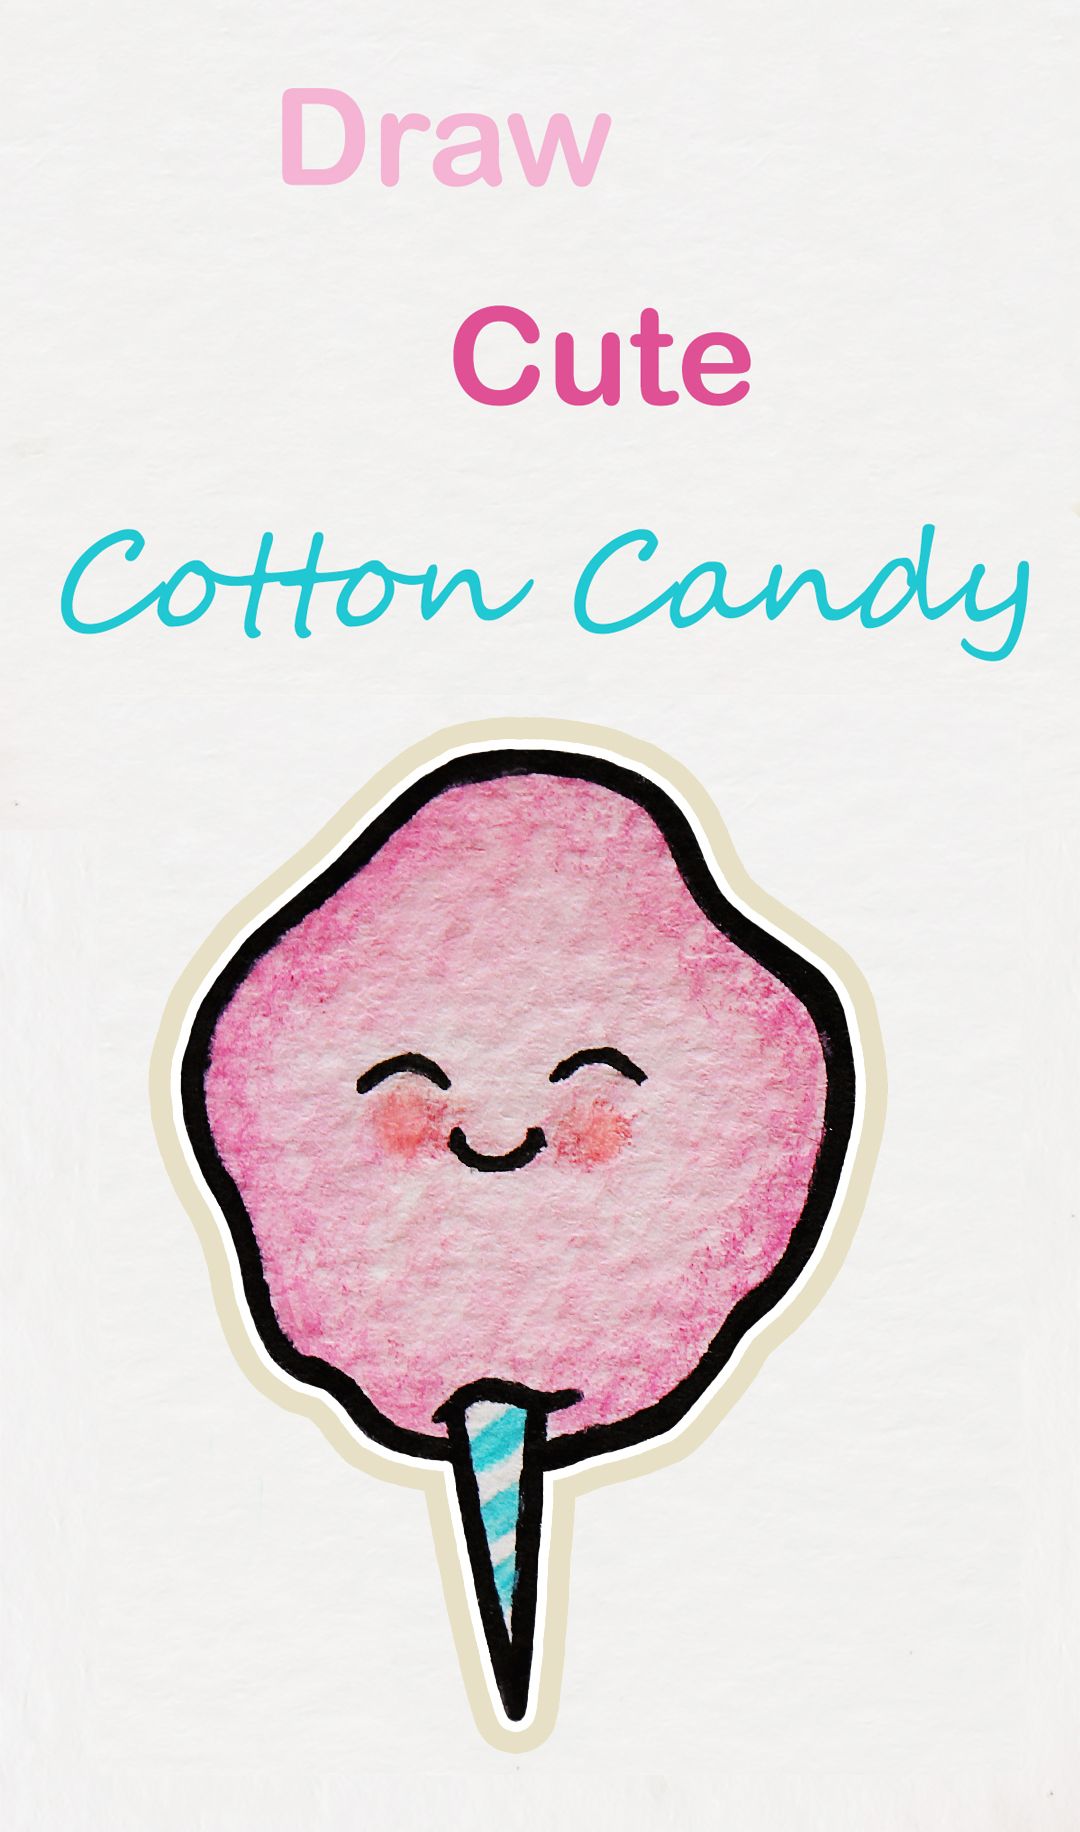  How To Draw Cotton Candy in the world Learn more here 